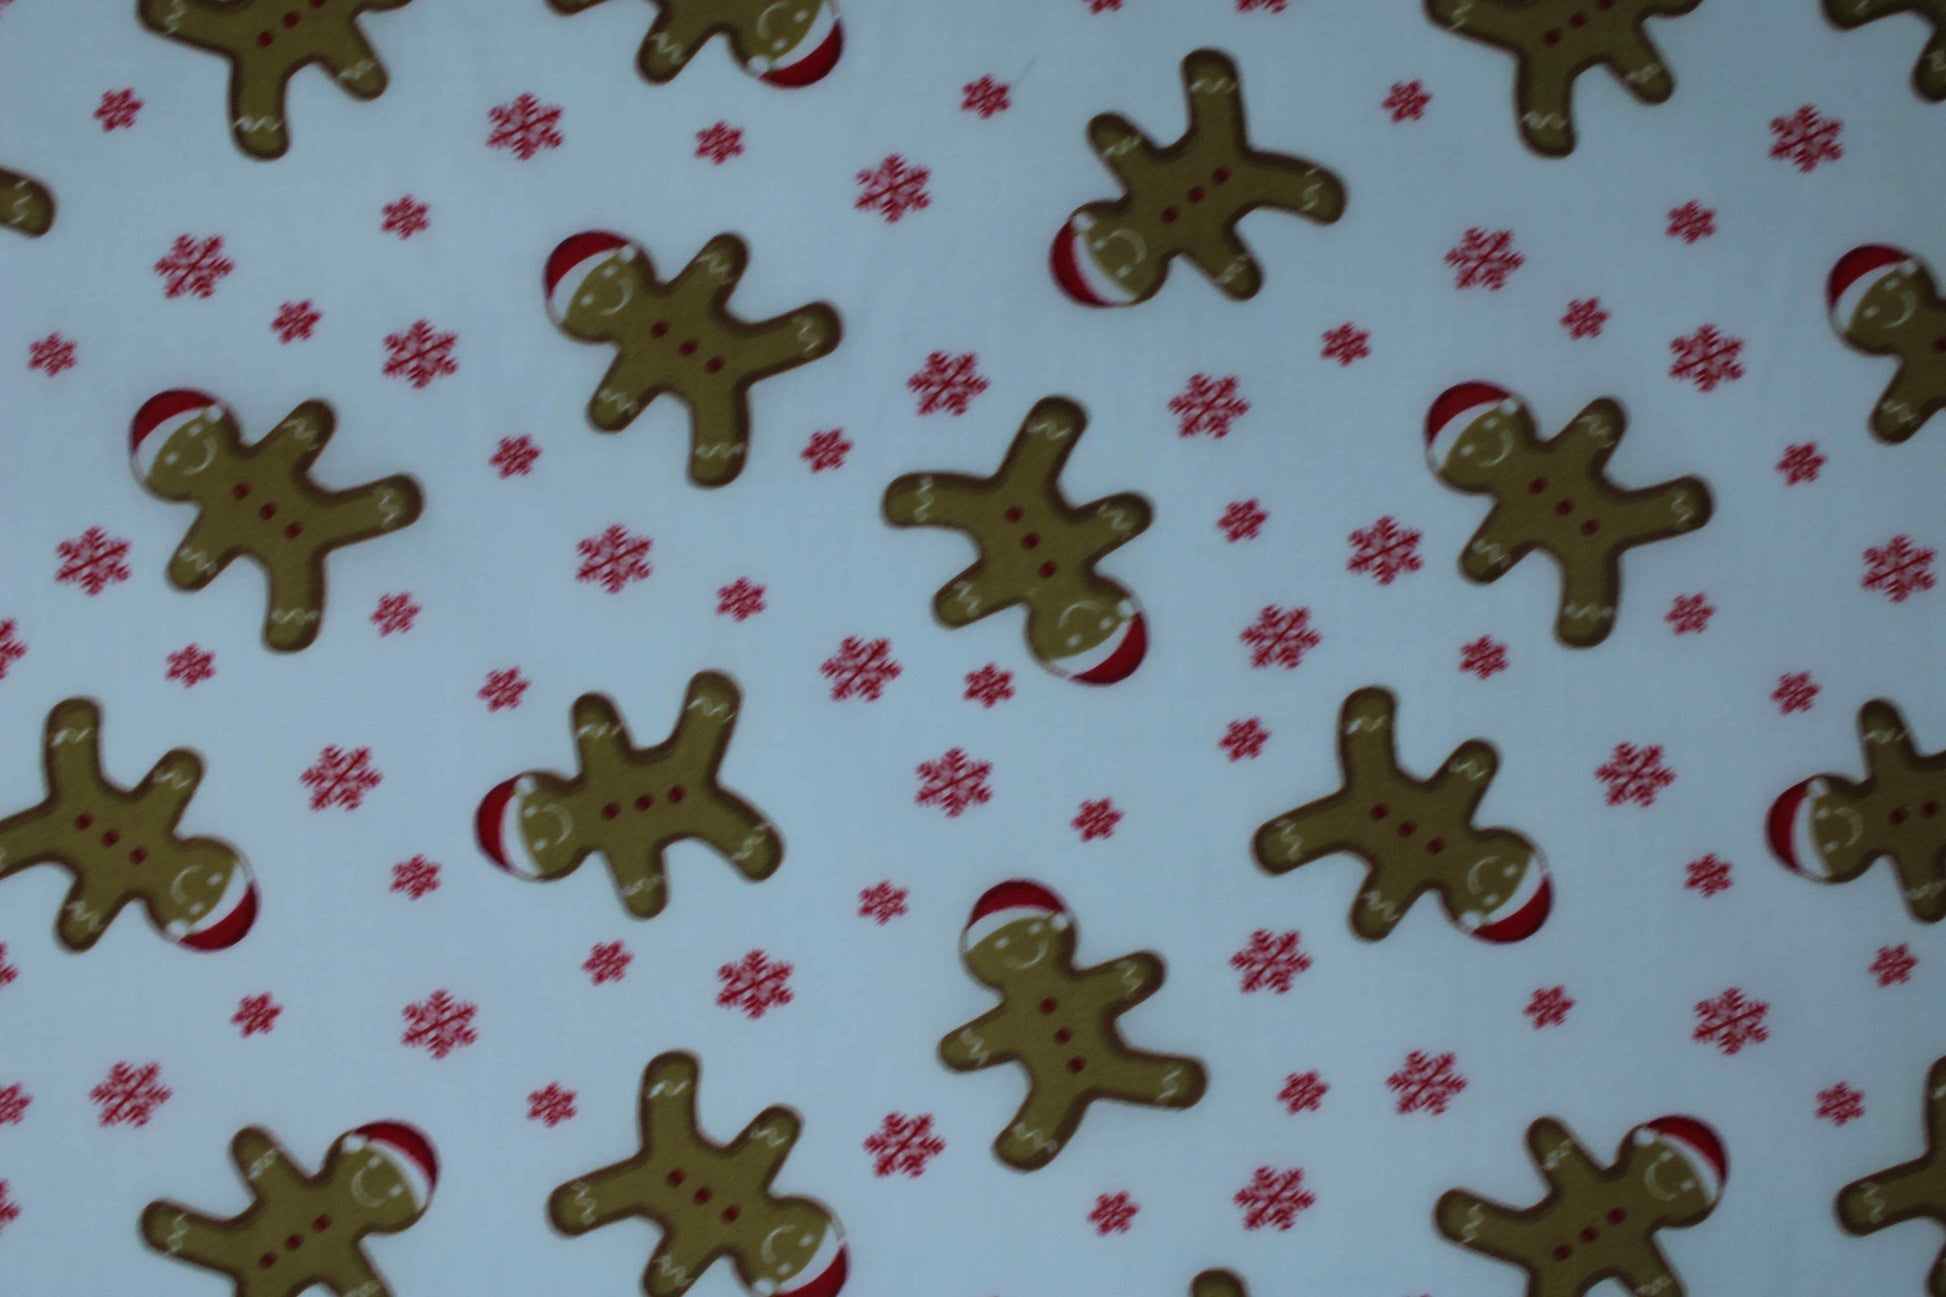 smiling gingerbread men with Xmas hat on white fabric with red snowflakes detail